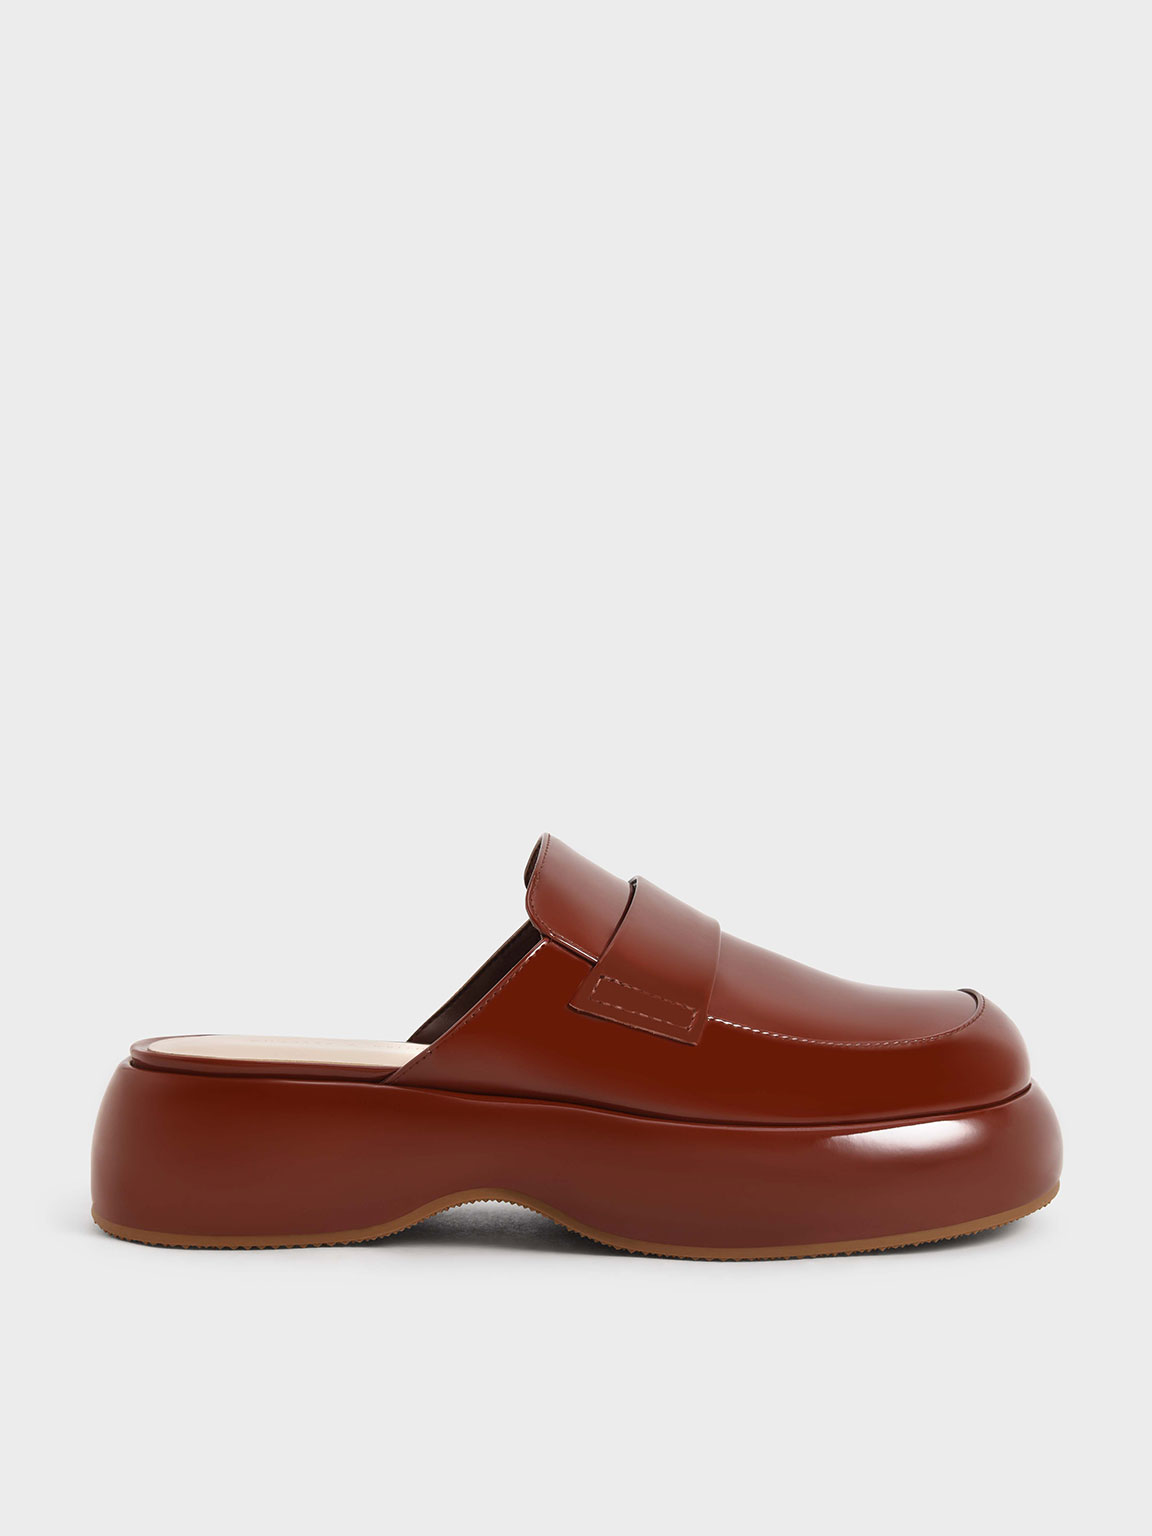 Cognac Rory Patent Platform Penny Loafer Mules - CHARLES & KEITH KW